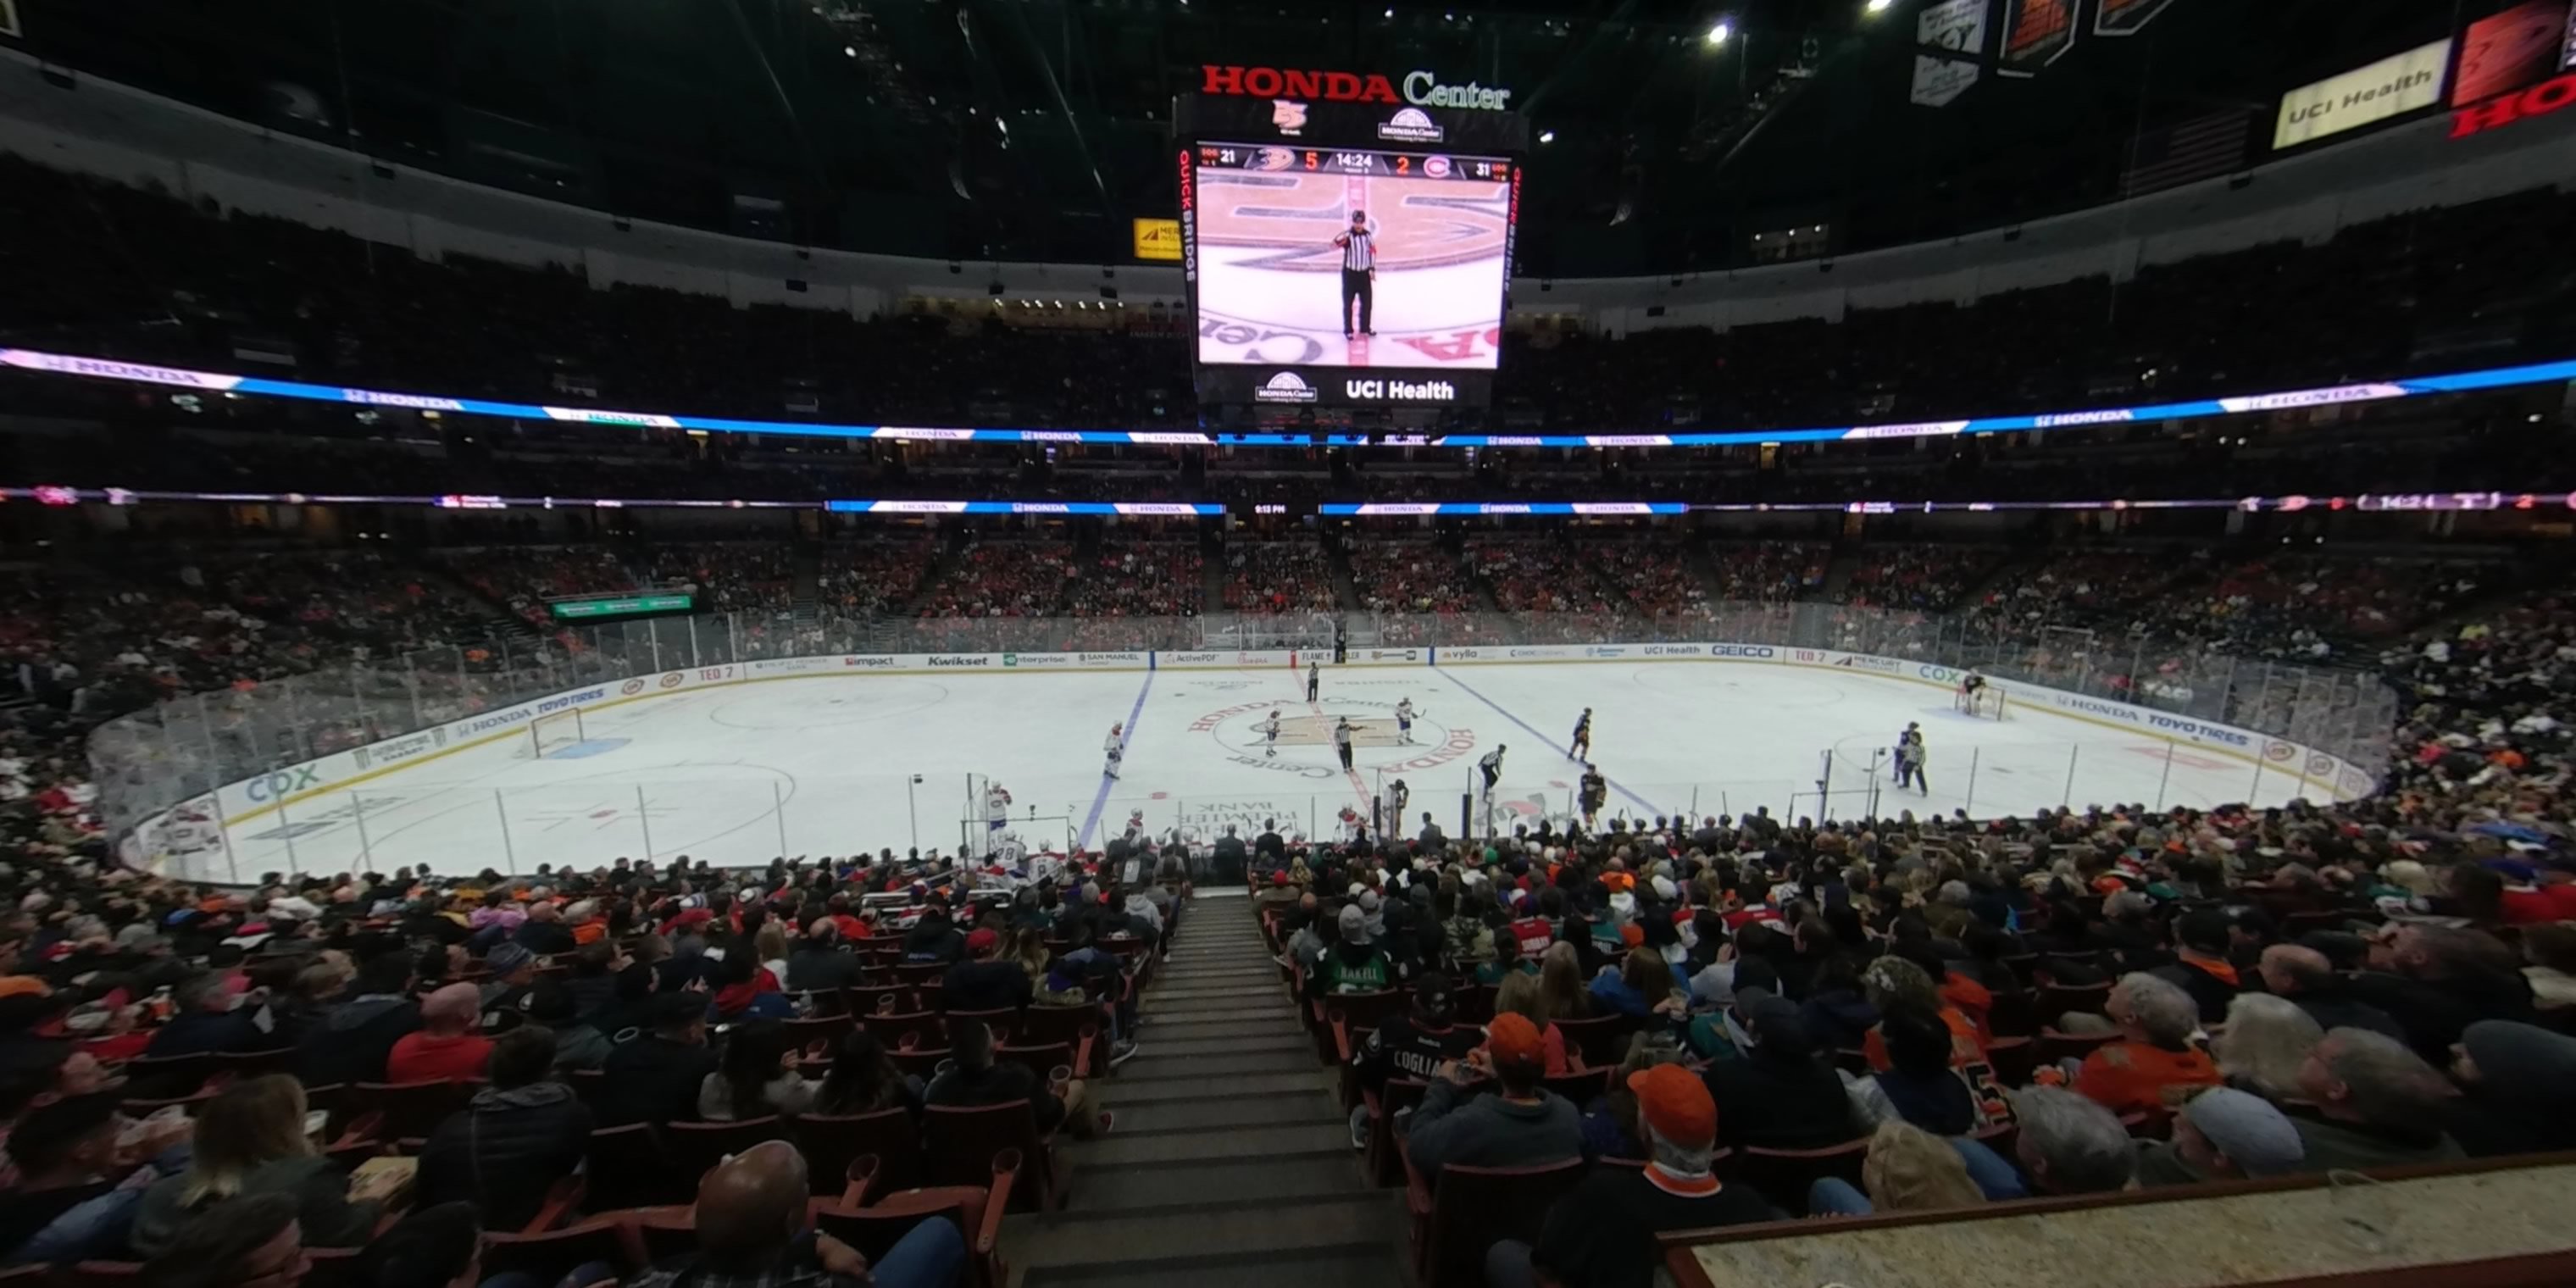 section 208 panoramic seat view  for hockey - honda center